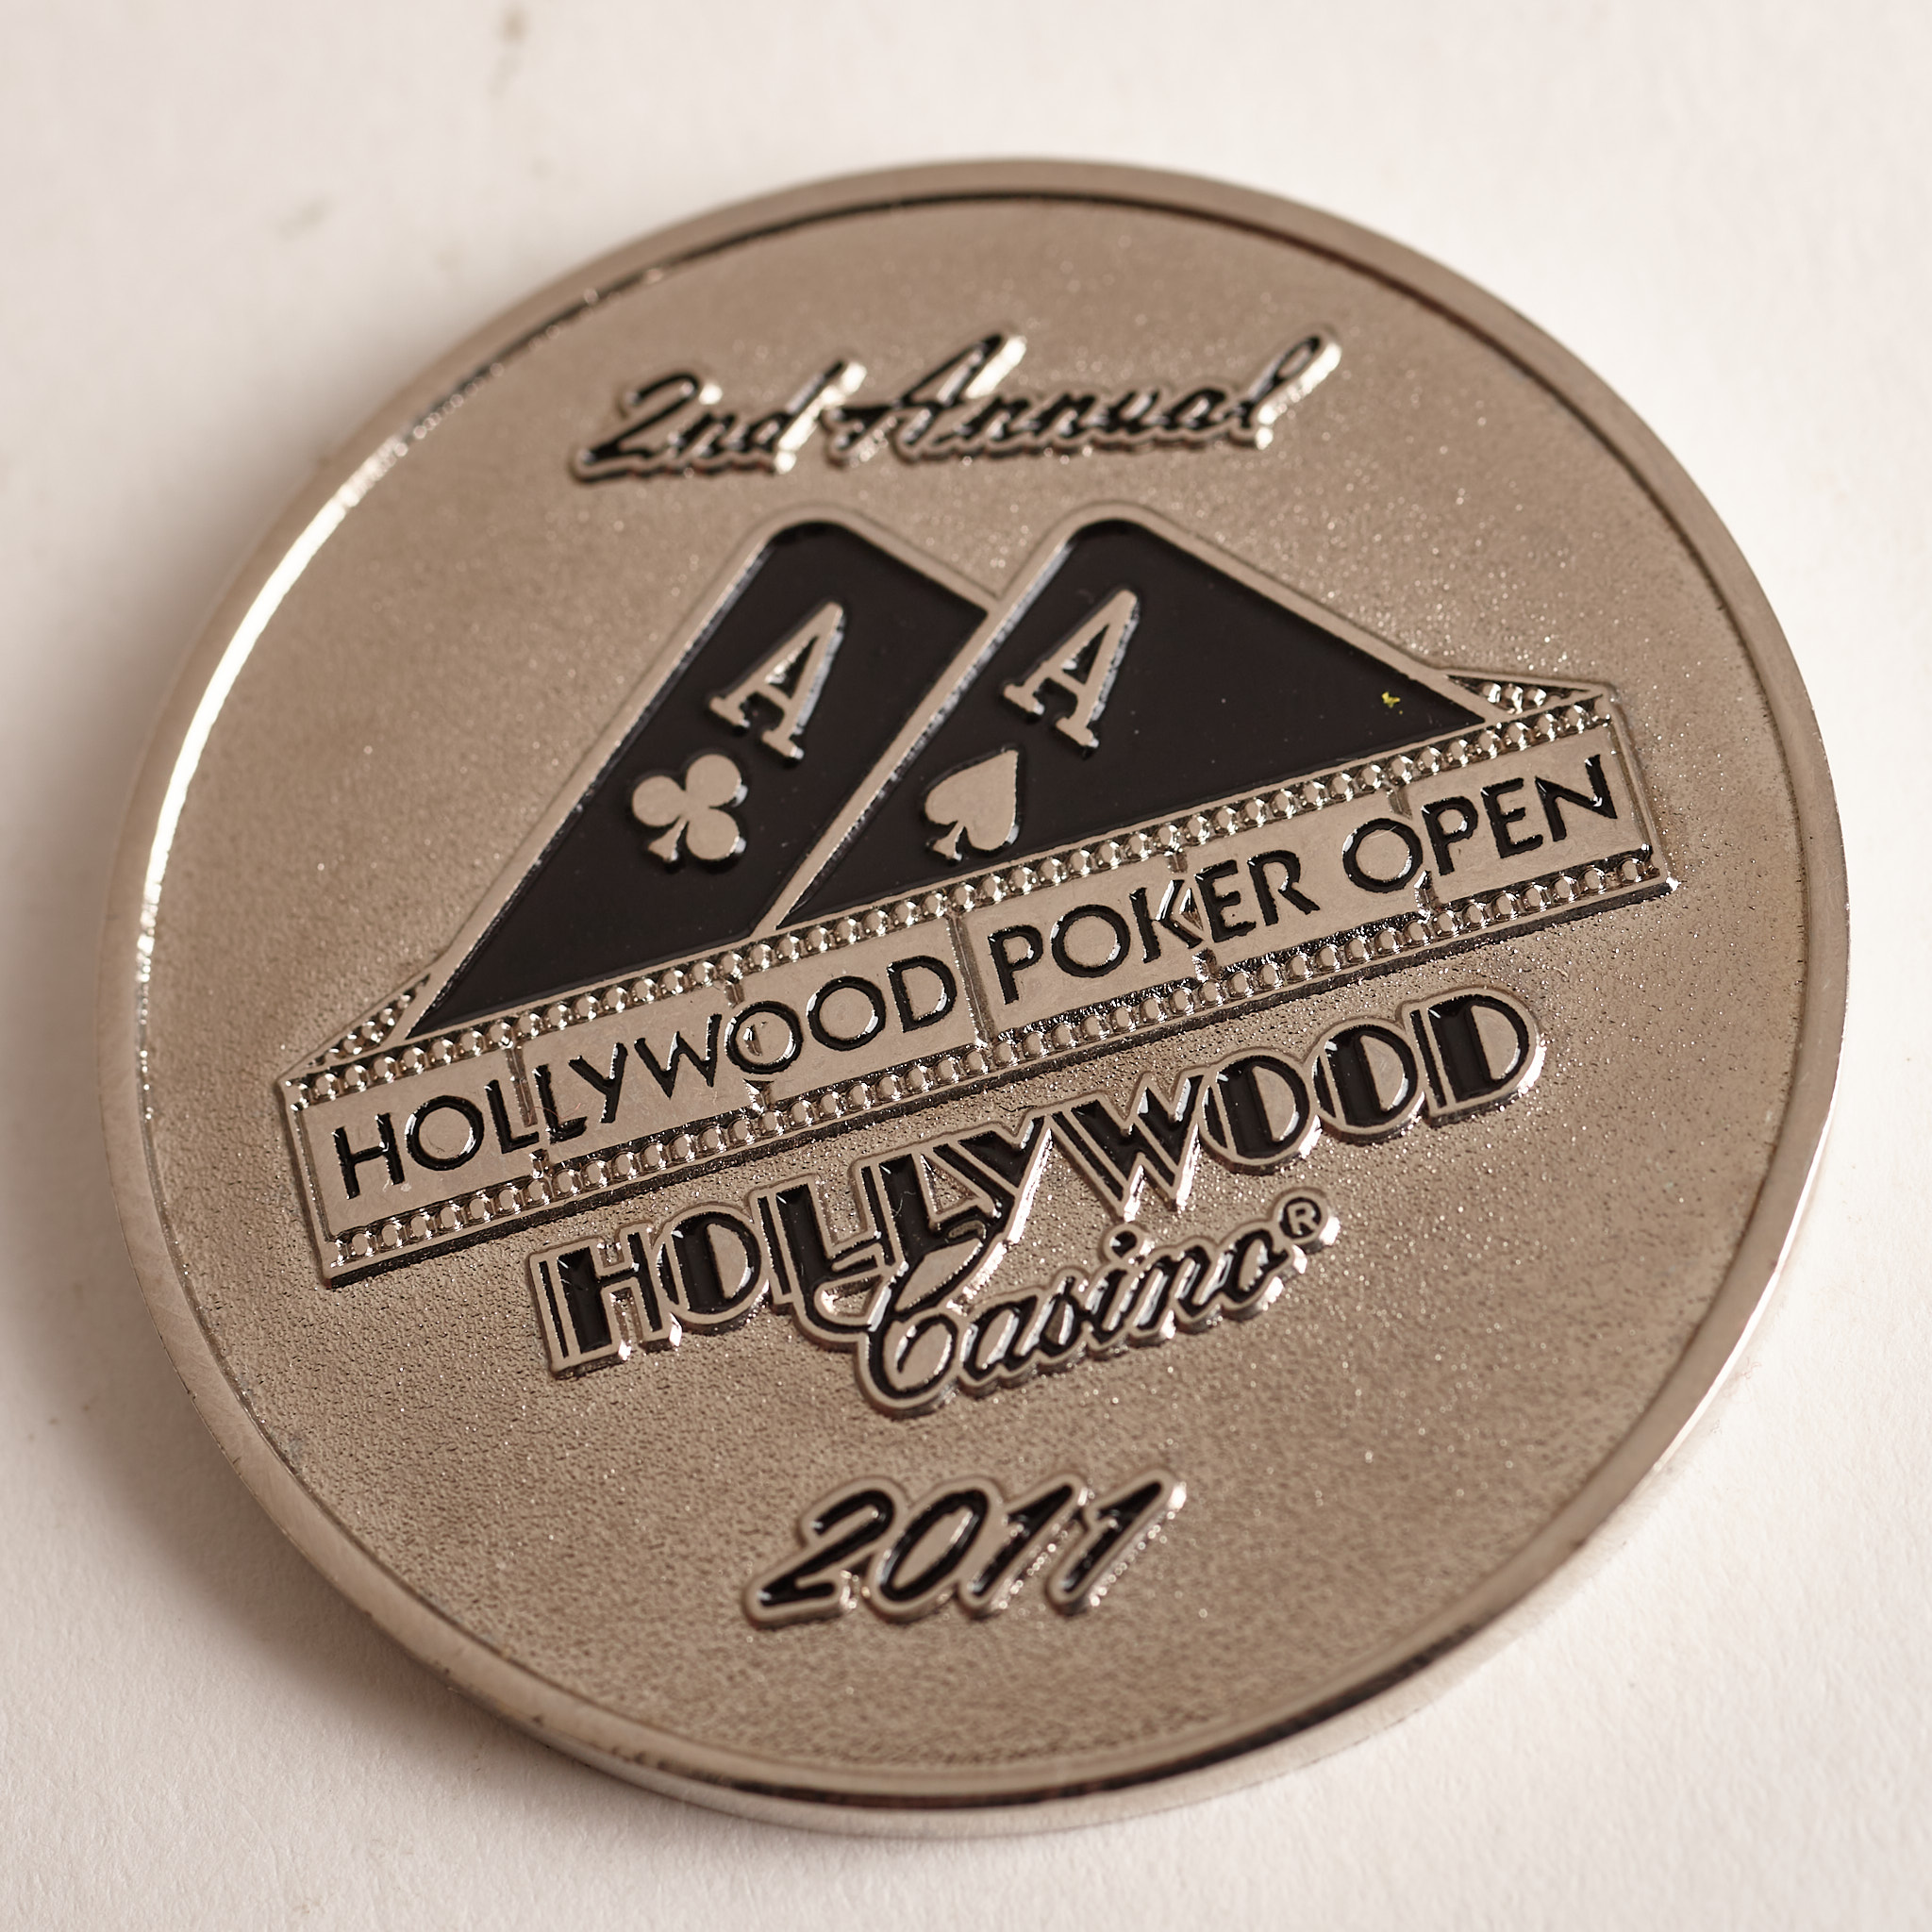 HOLLYWOOD CASINO, HOLLYWOOD POKER OPEN 2011, 2nd ANNUAL, Poker Card Guard